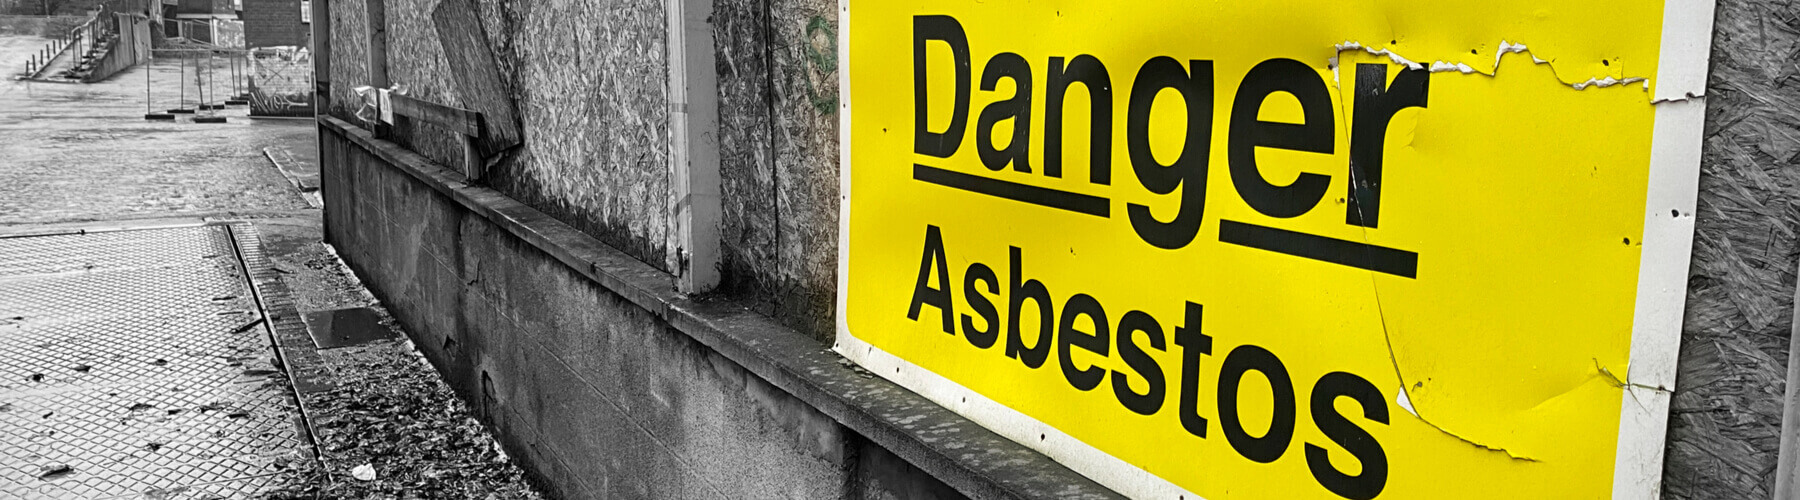 danger, asbestos sign on concrete wall